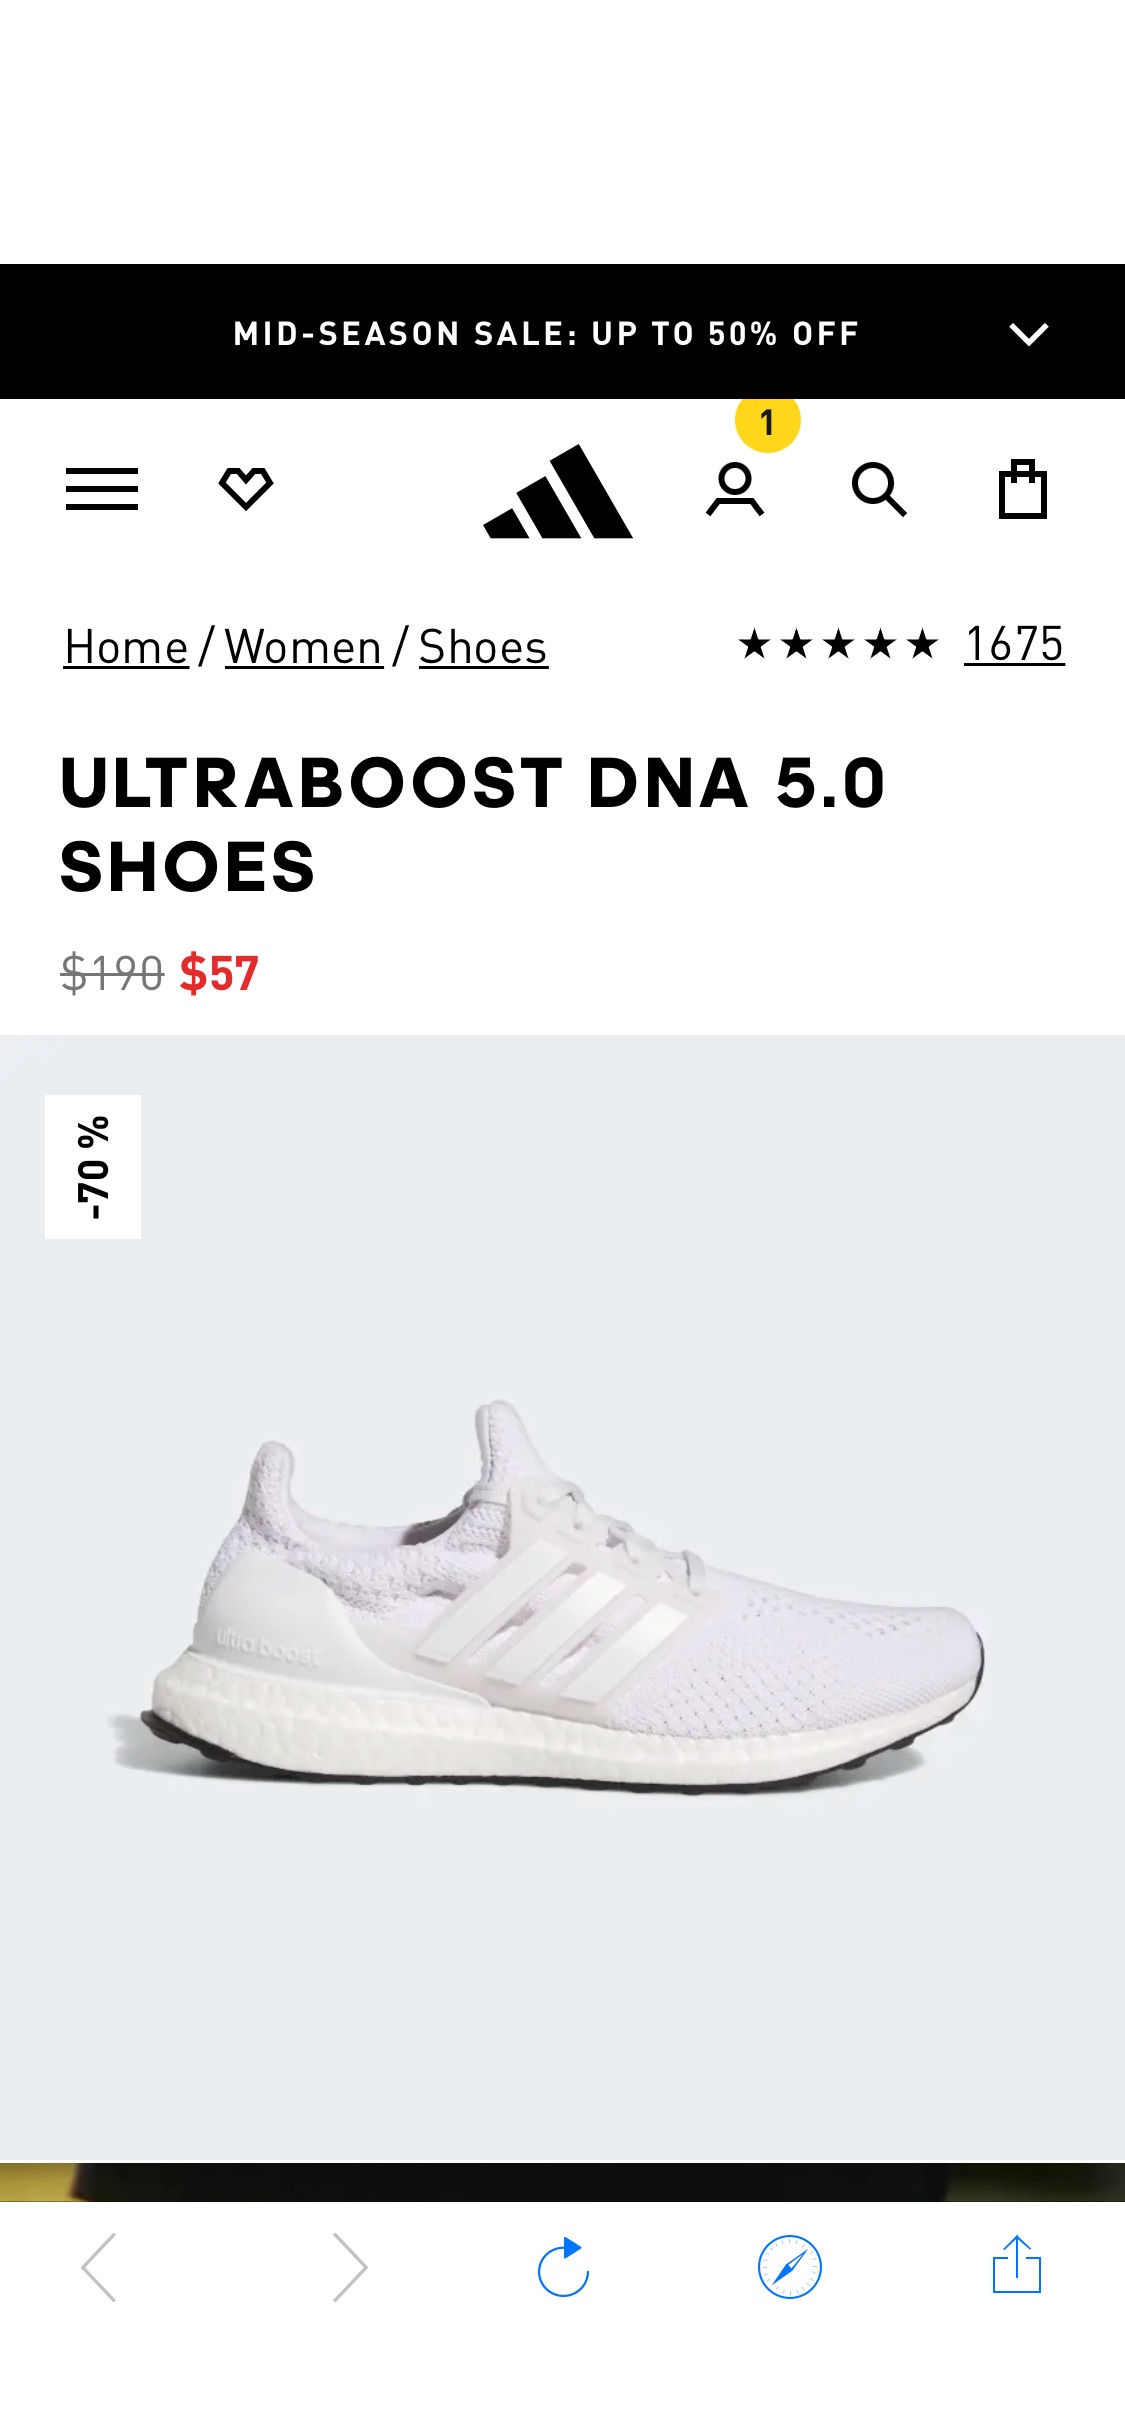 adidas Ultraboost DNA 5.0 Shoes - White | Women's Lifestyle | adidas US